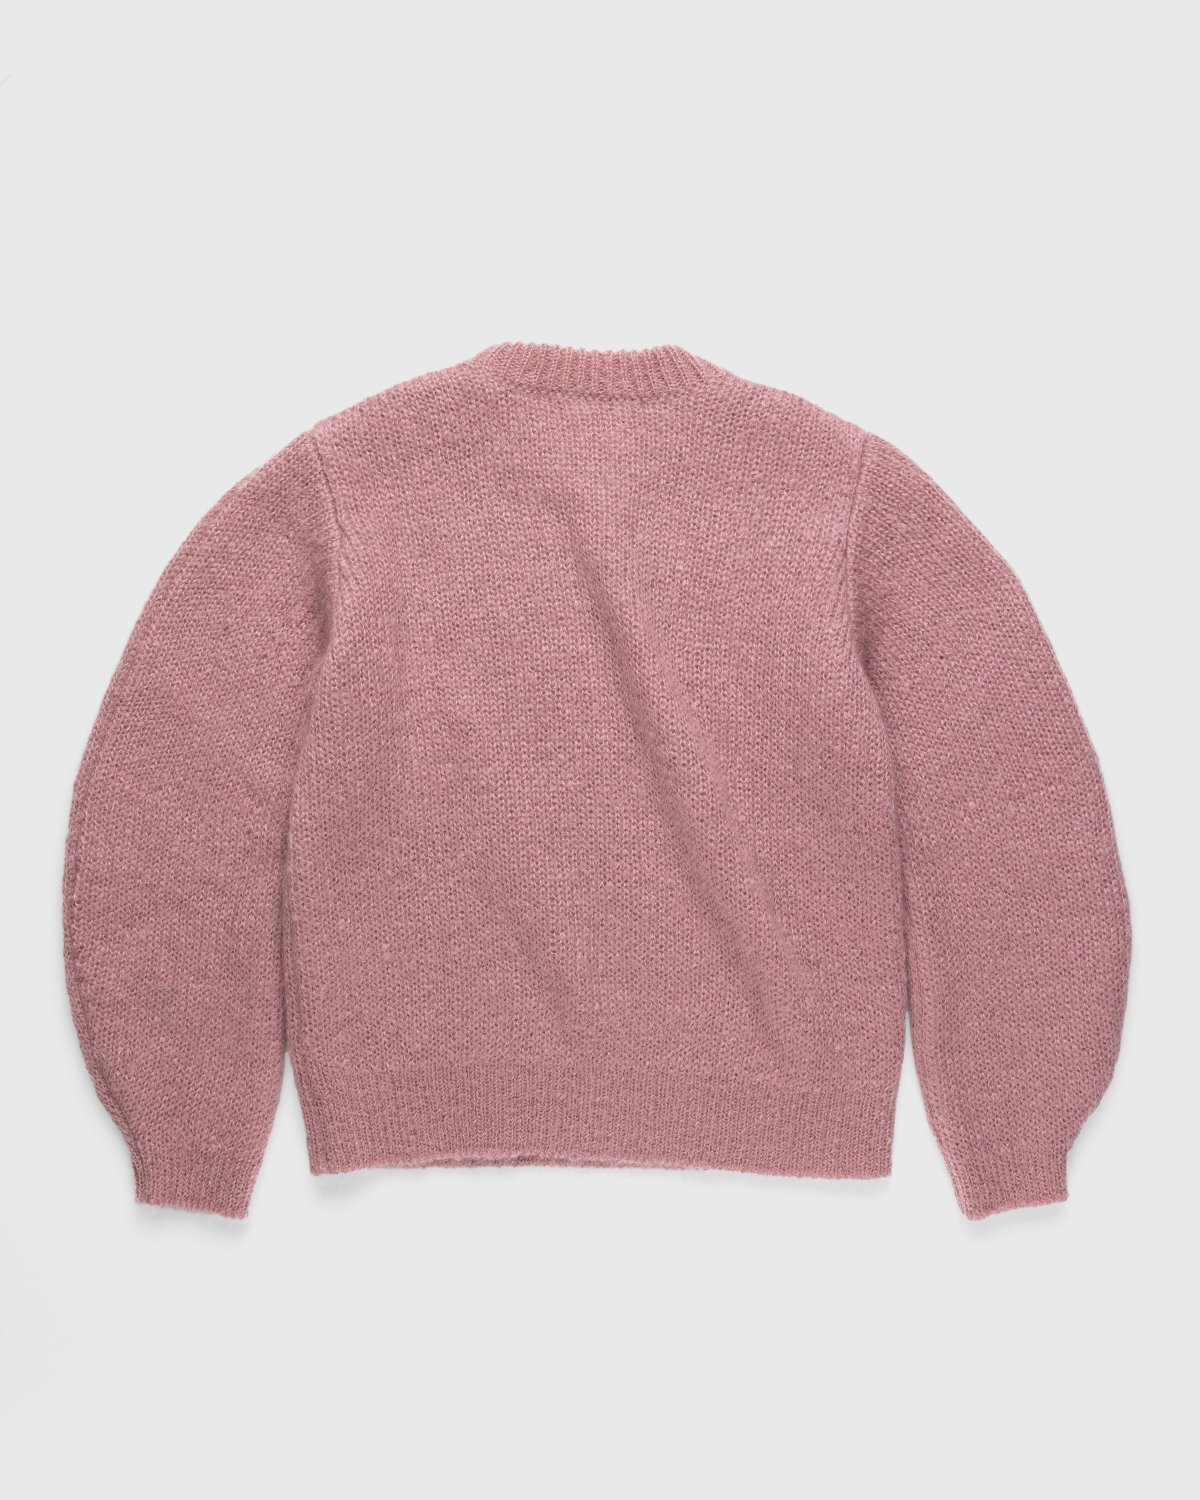 Jil Sander - Knitted Sweater Pink - Clothing - Pink - Image 2